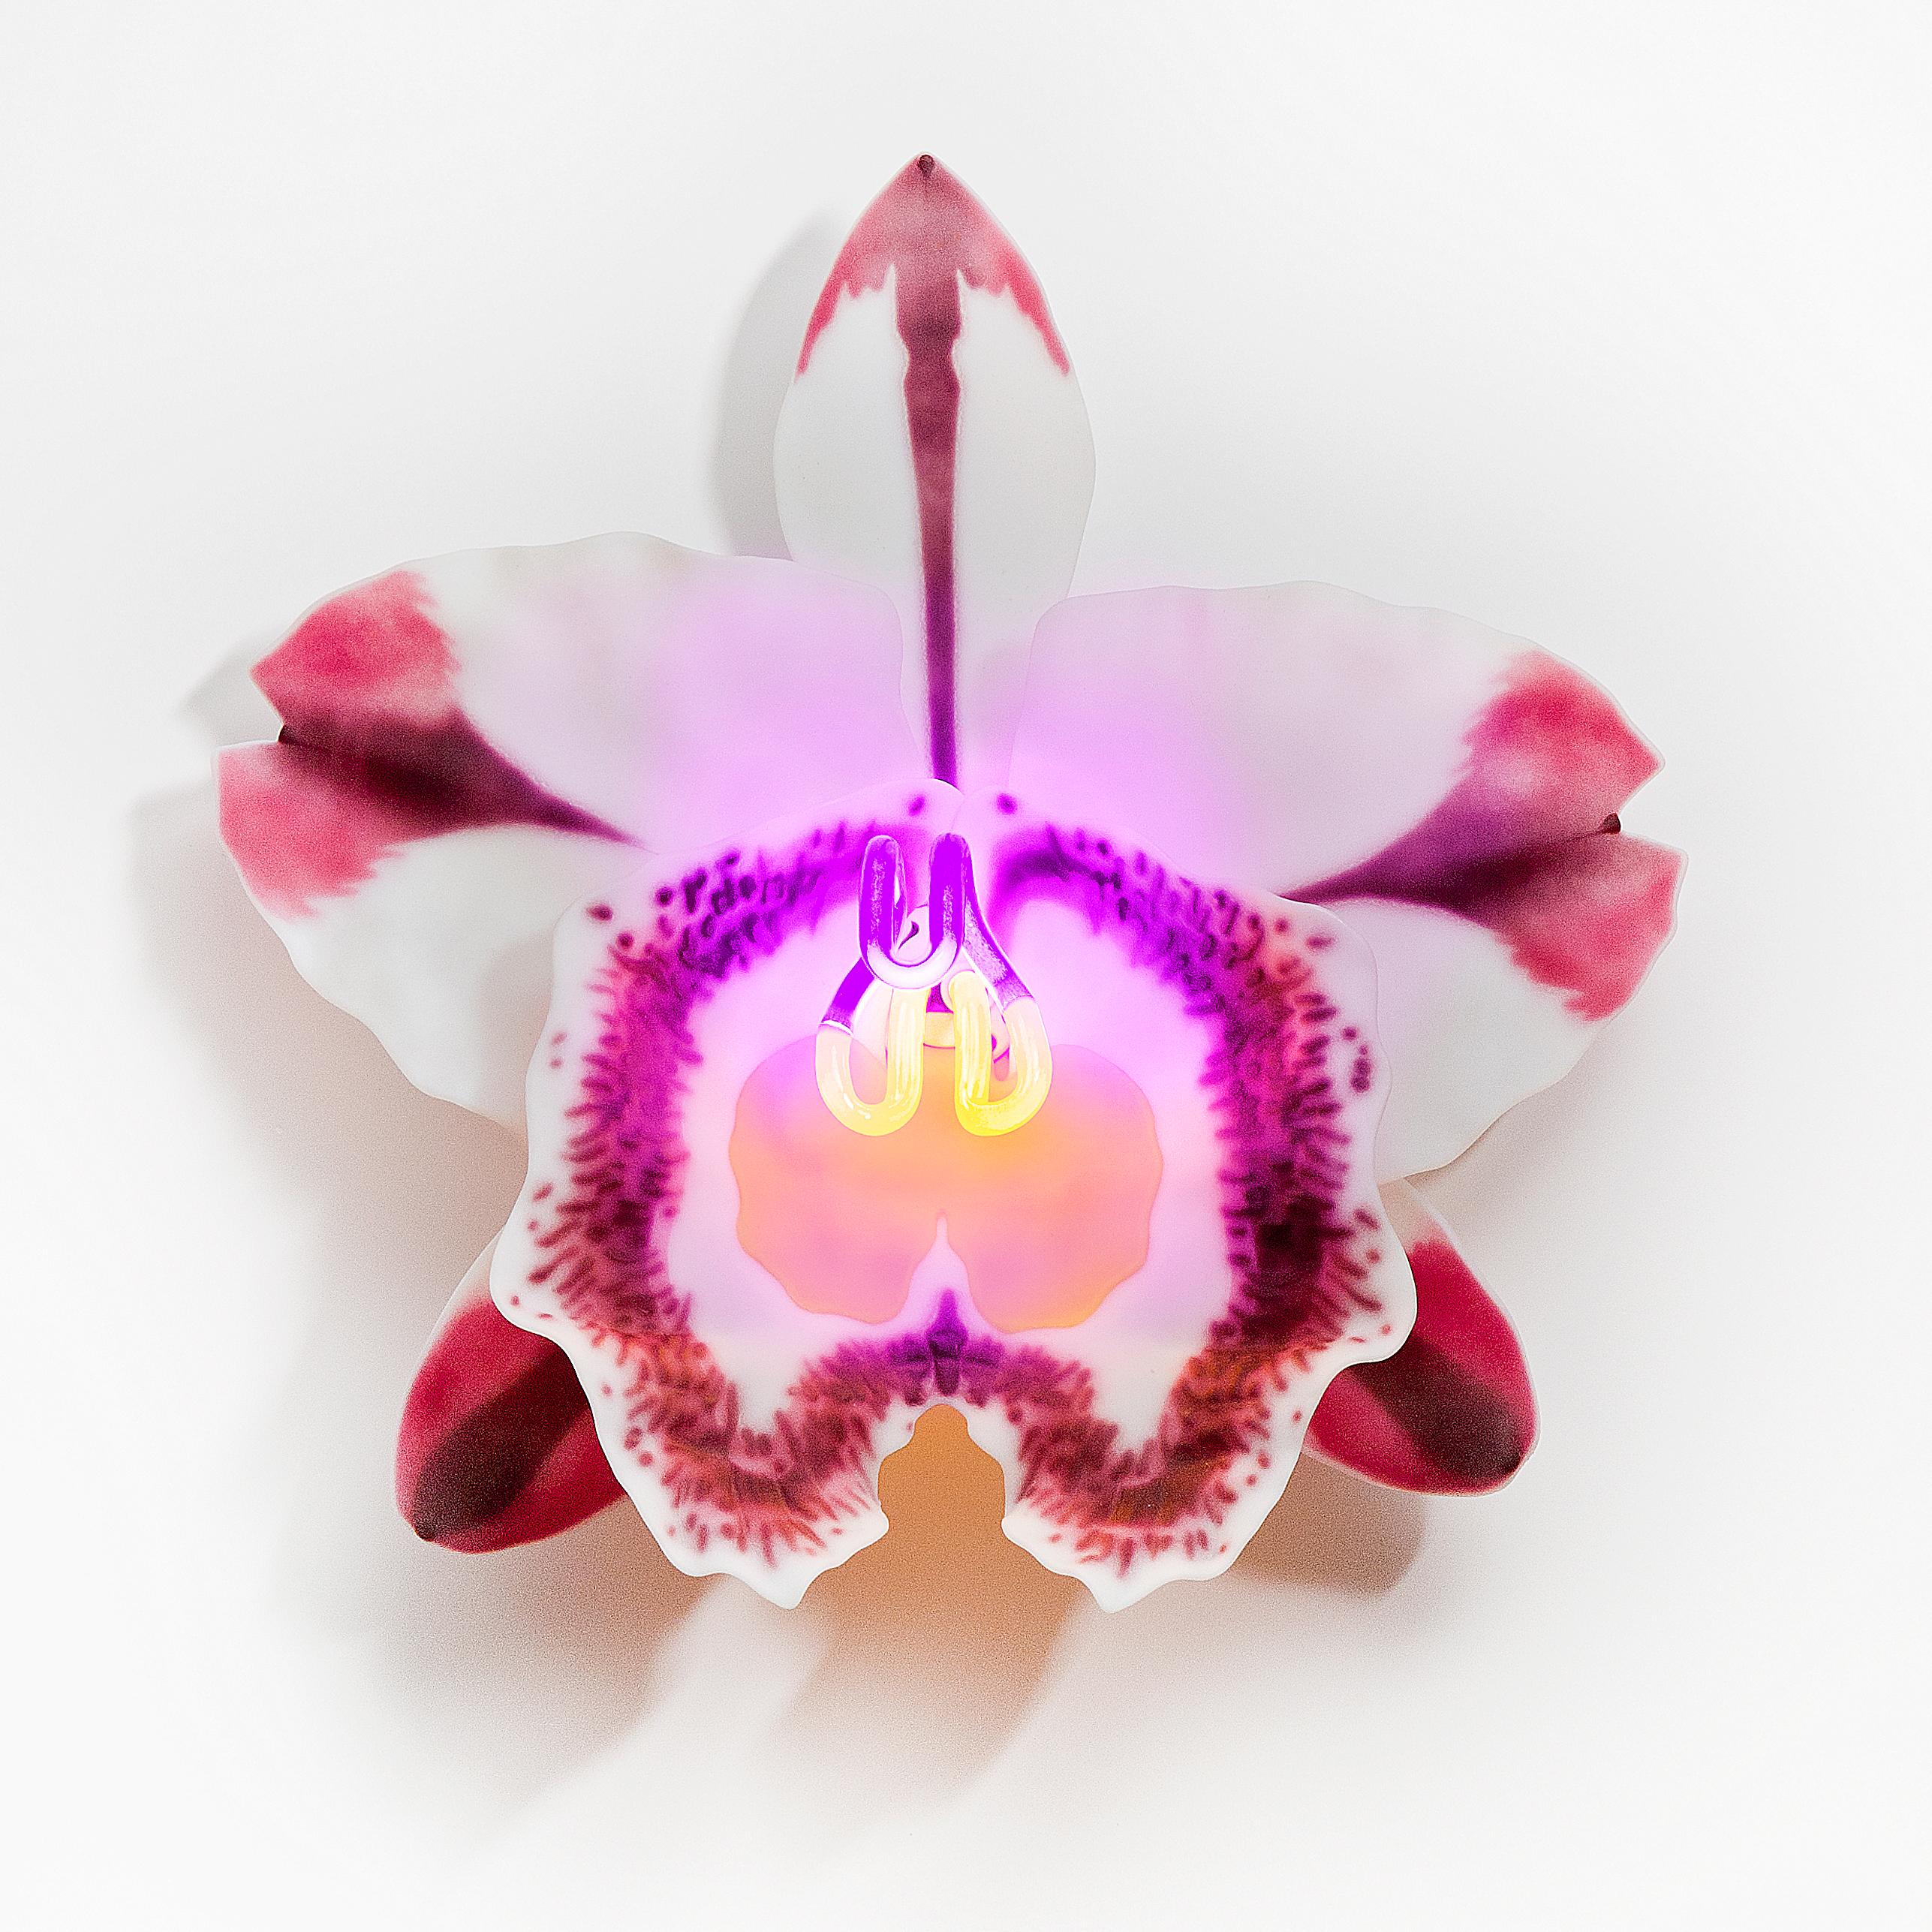 Orchis Exotica Cattleya Pink Striker is a unique glass and neon sculptural wall-mounted orchid by the British artist Laura Hart. 

The Orchis Exotica Collection are created from 6 components/petals ( each handmade and fused & slumped glass) which